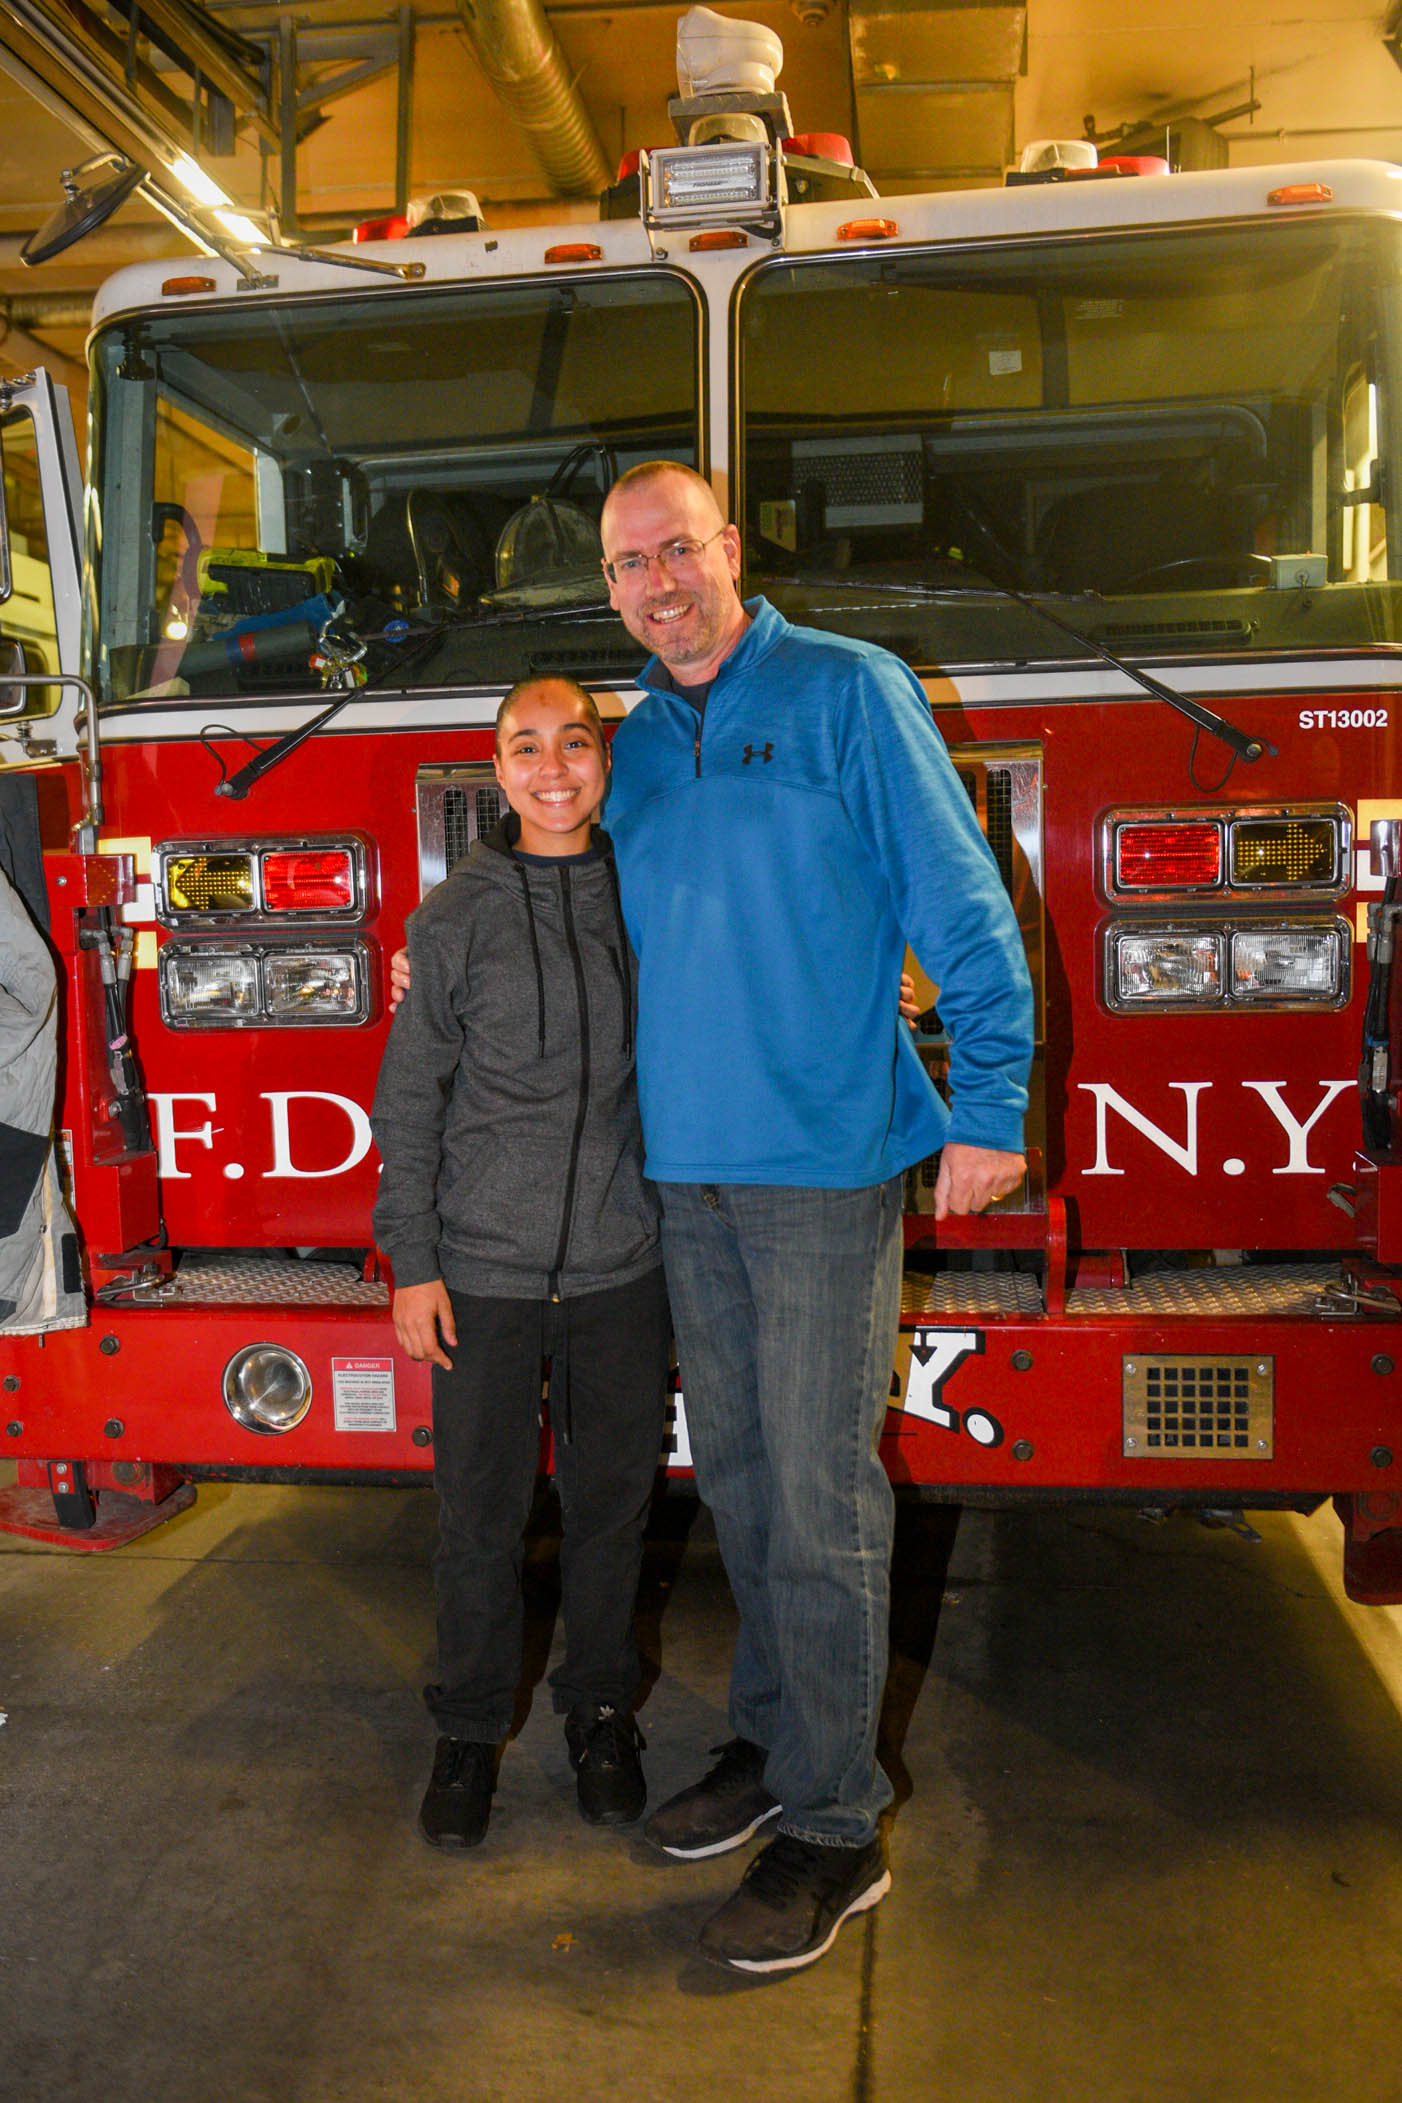 PHOTO: Anissa Cruz, 21, reunited with retired firefighter Stephen McNally in New York this month. McNally saved Cruz and her mother from an apartment fire in 2002.